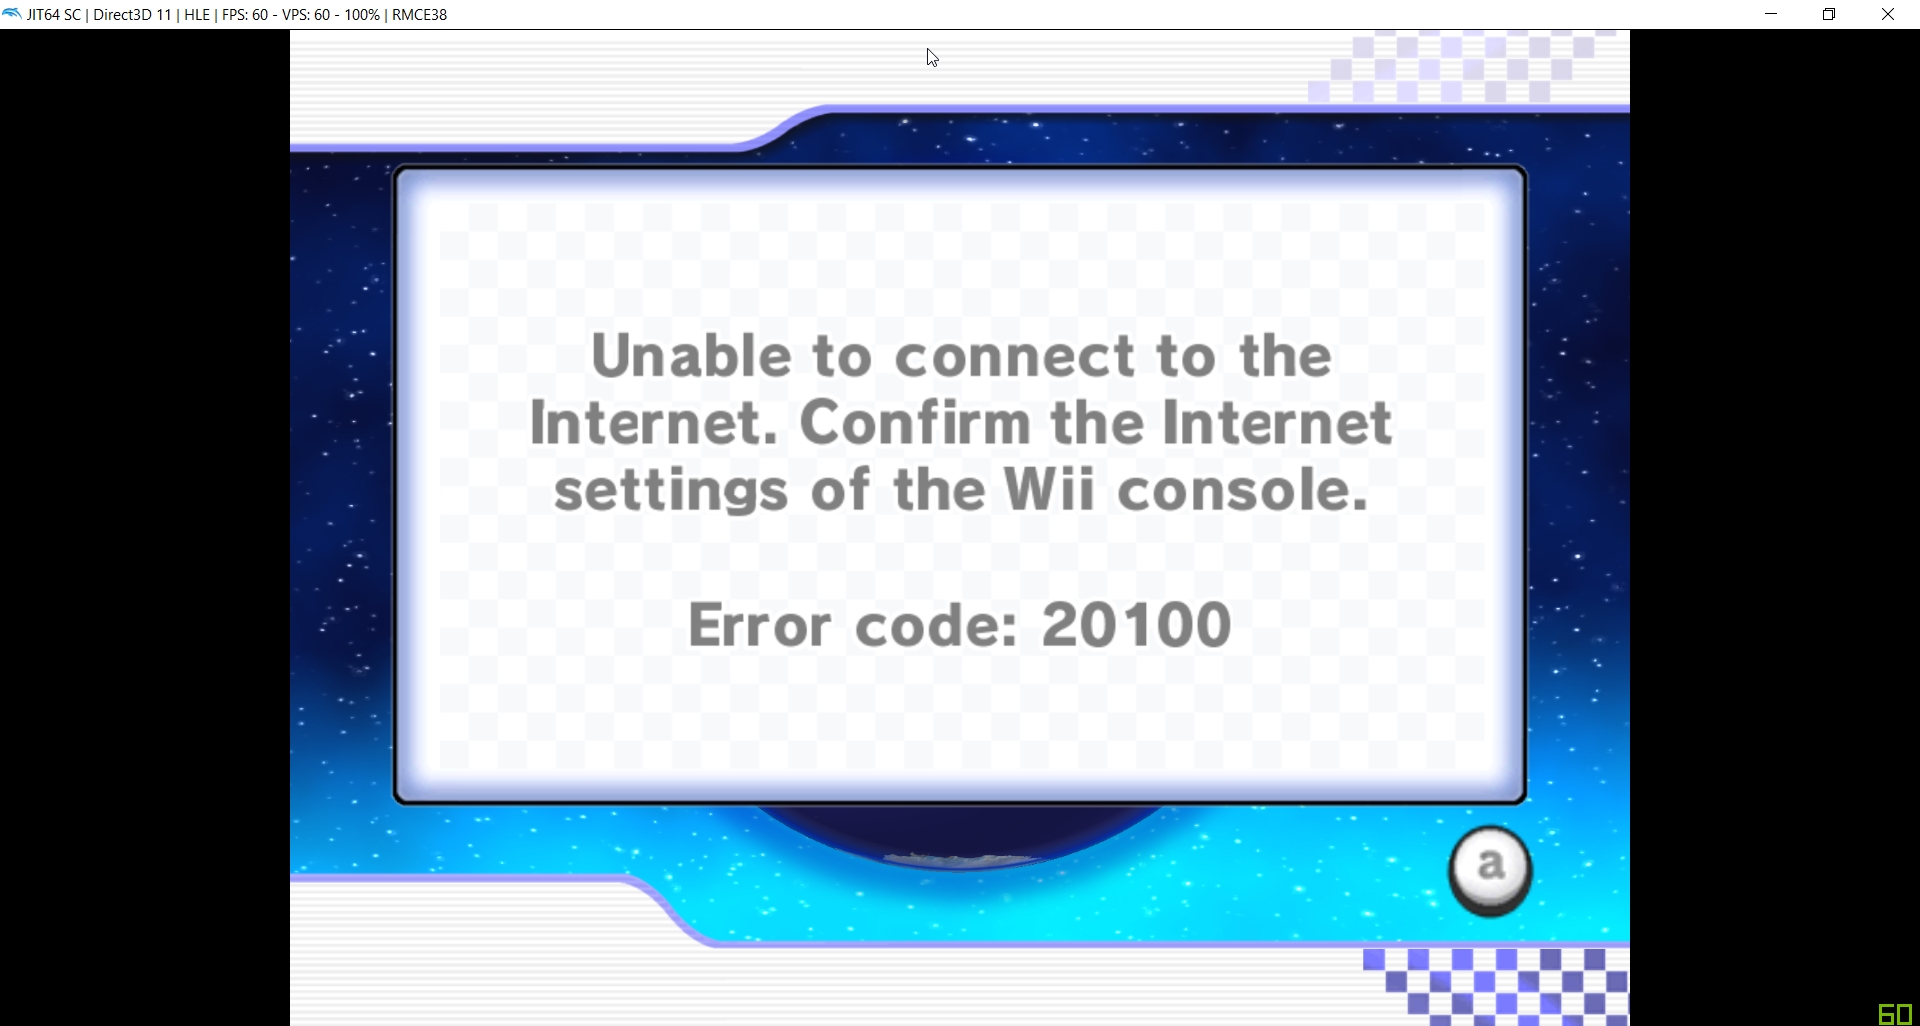 unable to connect to the extensive error code 20100